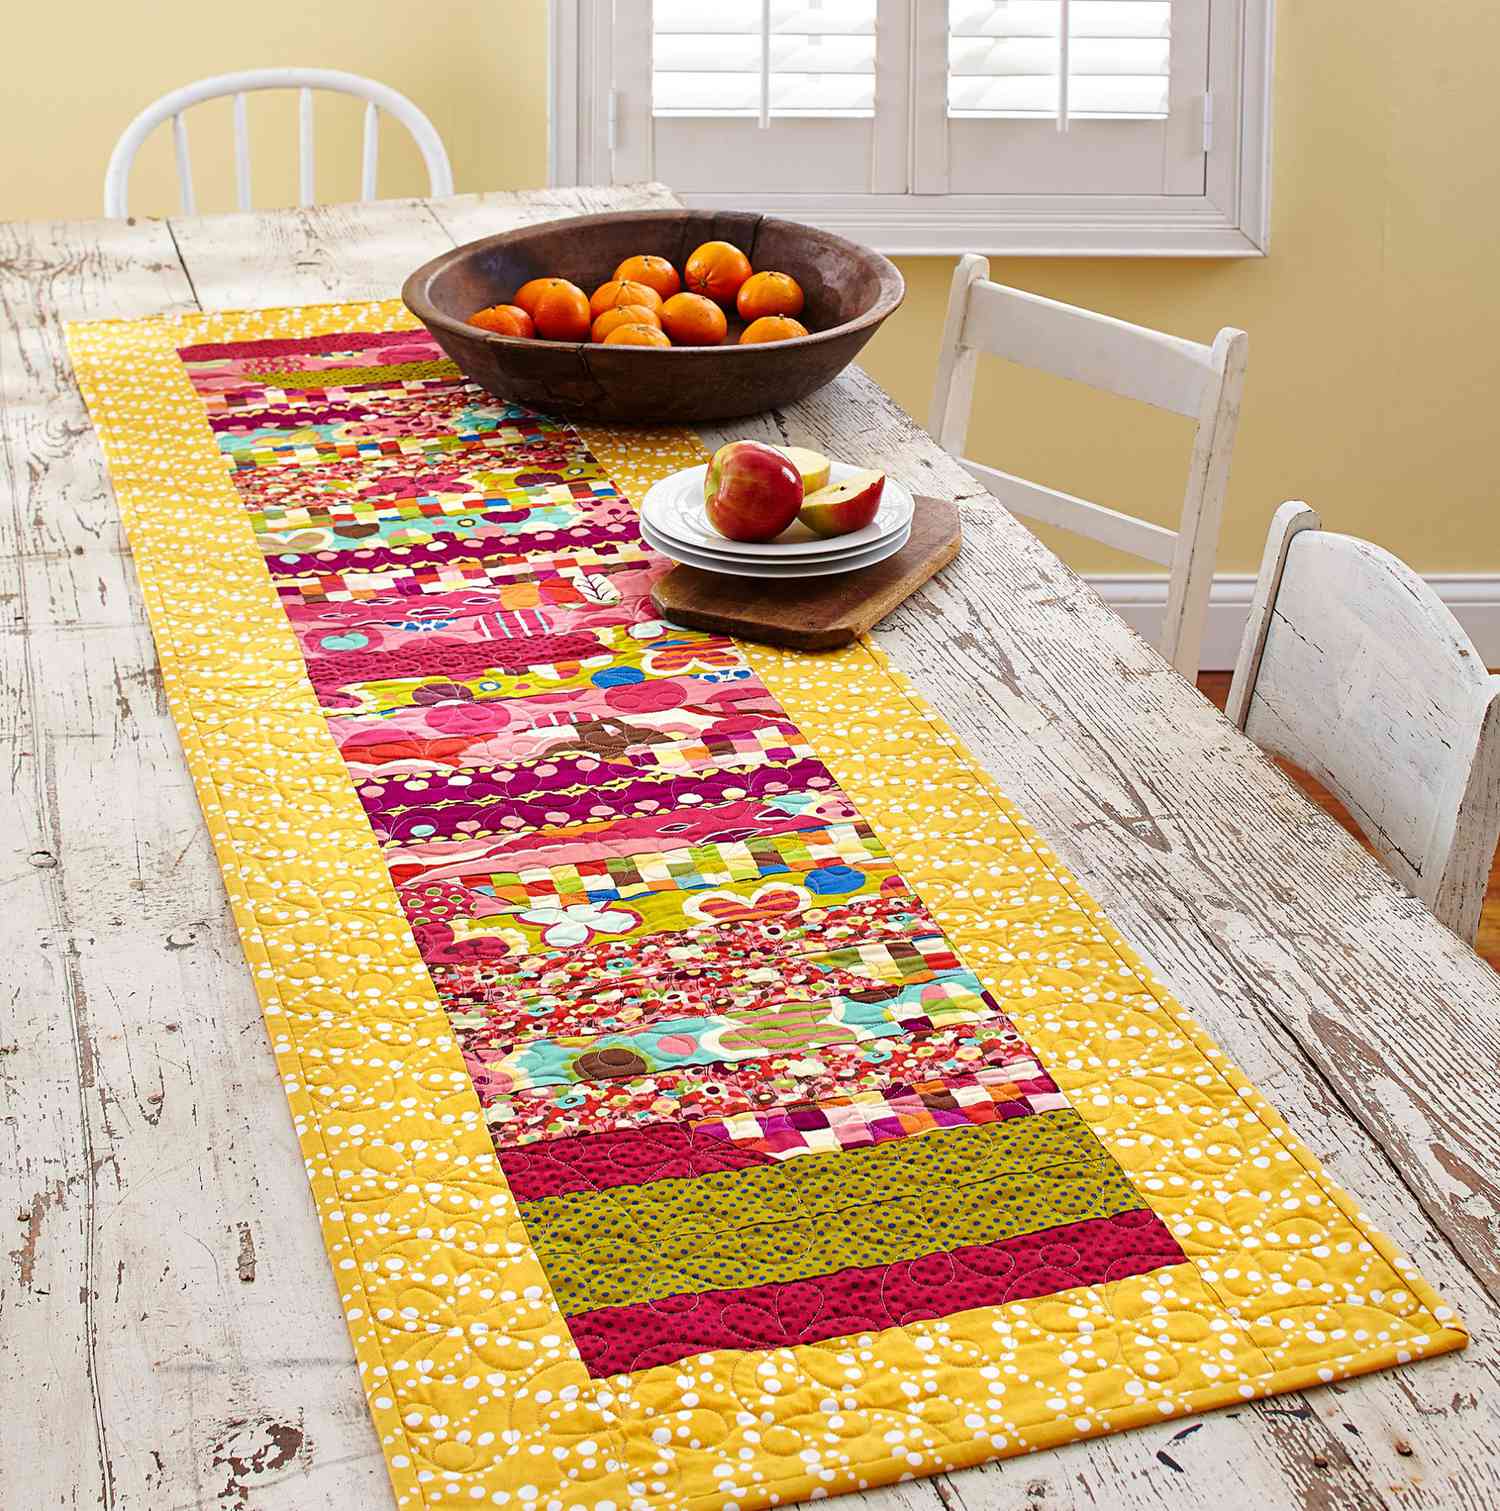 Quilted Fall Table Runner Leaf Table Runner Fall Table Runner Thanksgiving Table Runner Orange Yellow Red Cream